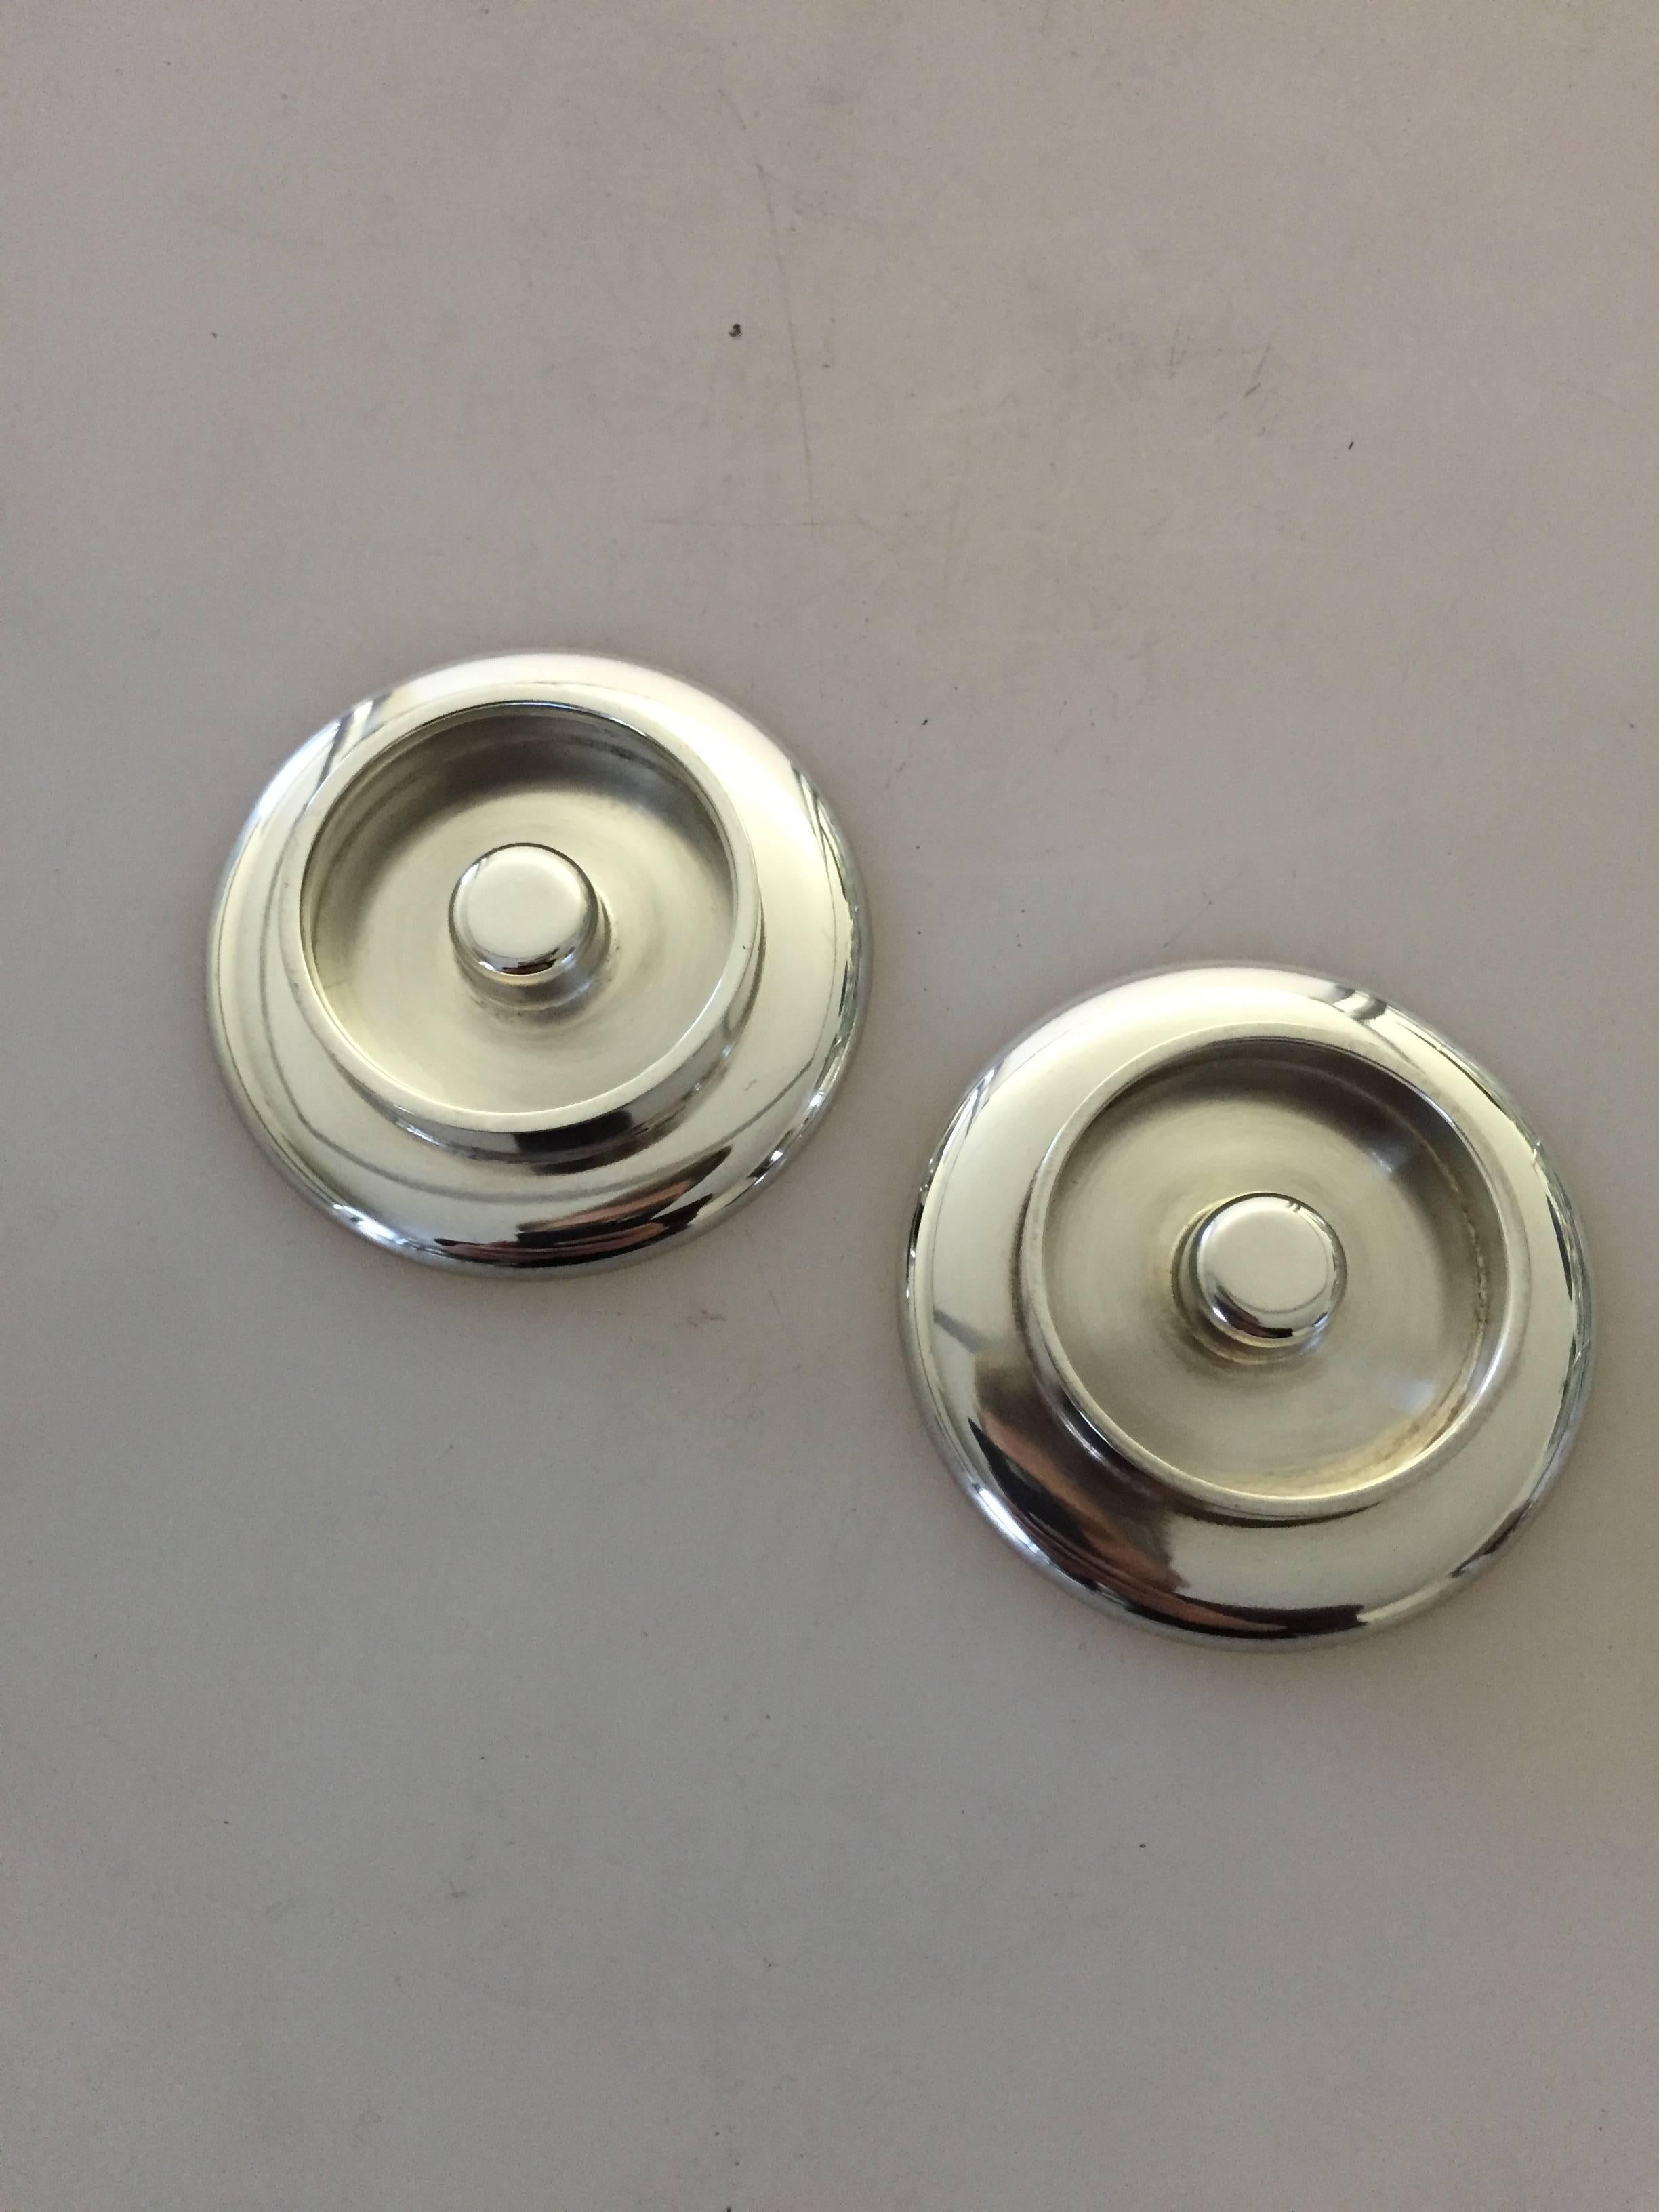 Georg Jensen sterling silver candleholders #1157A. Both in perfect condition.

Measures: 6,1 cm diameter.